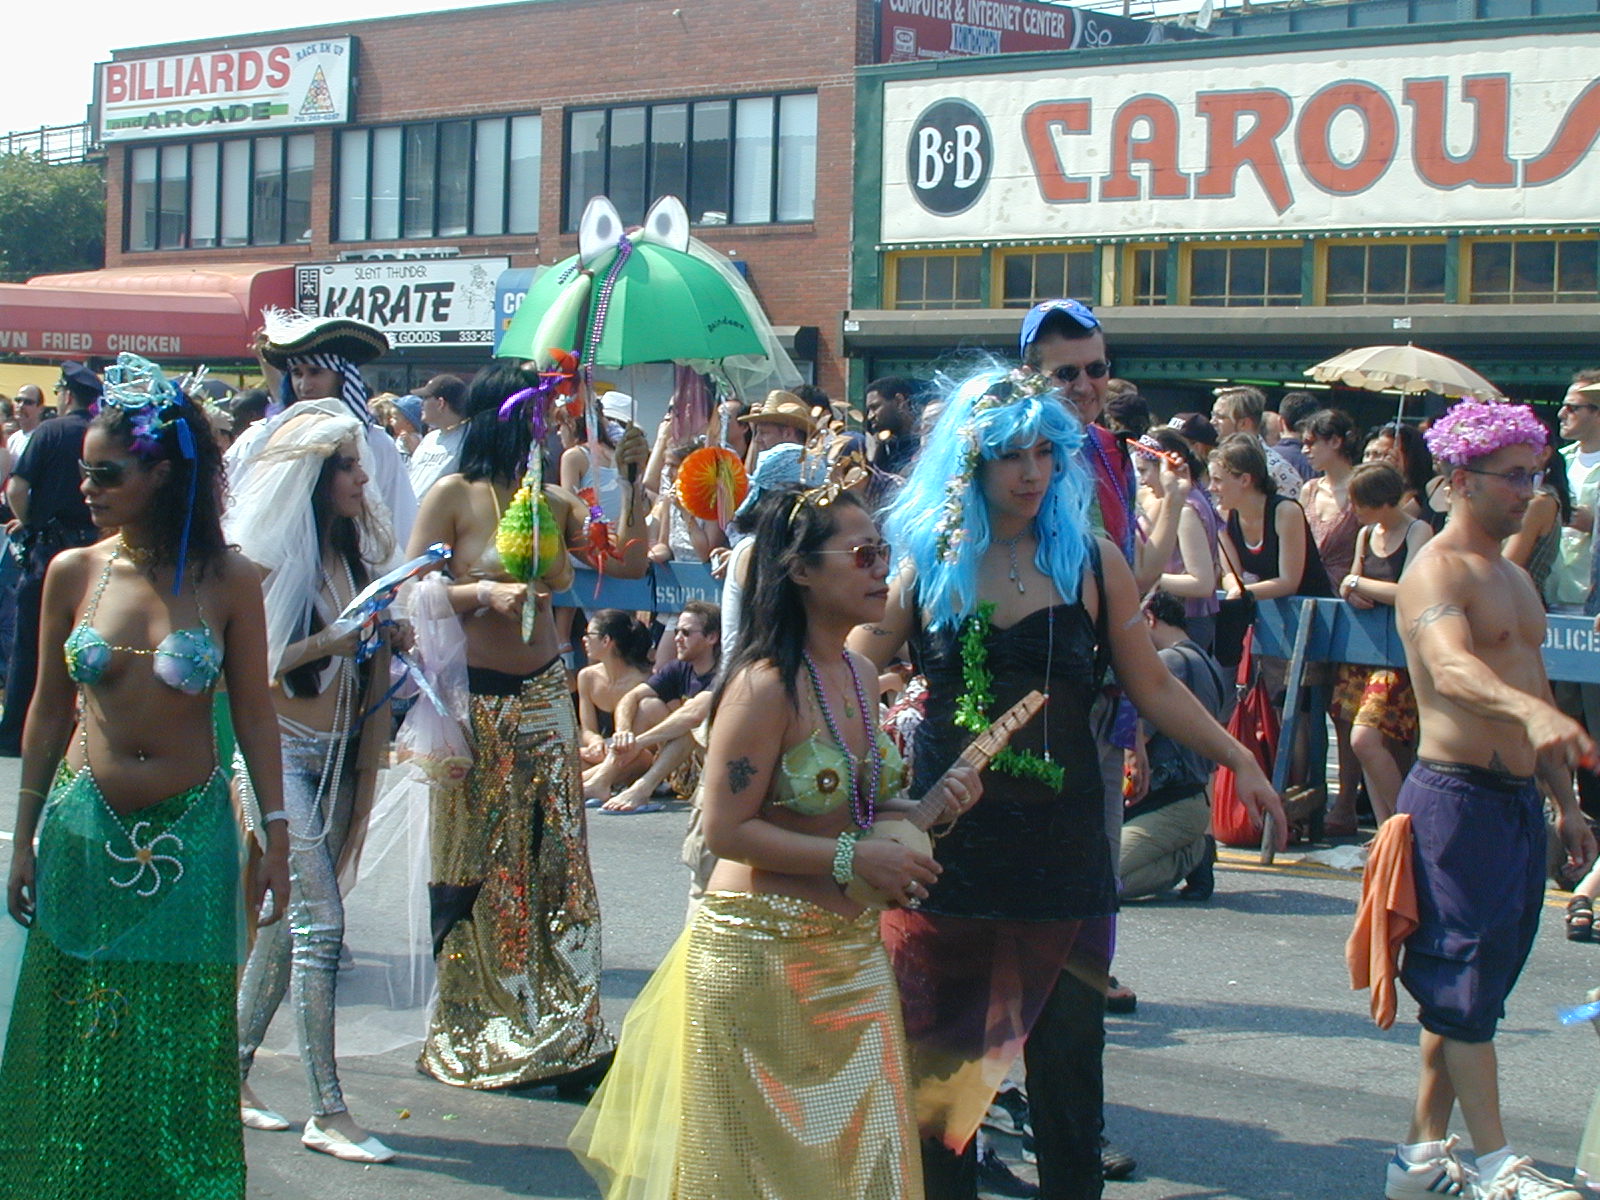 people in colorful costumes walk along the street